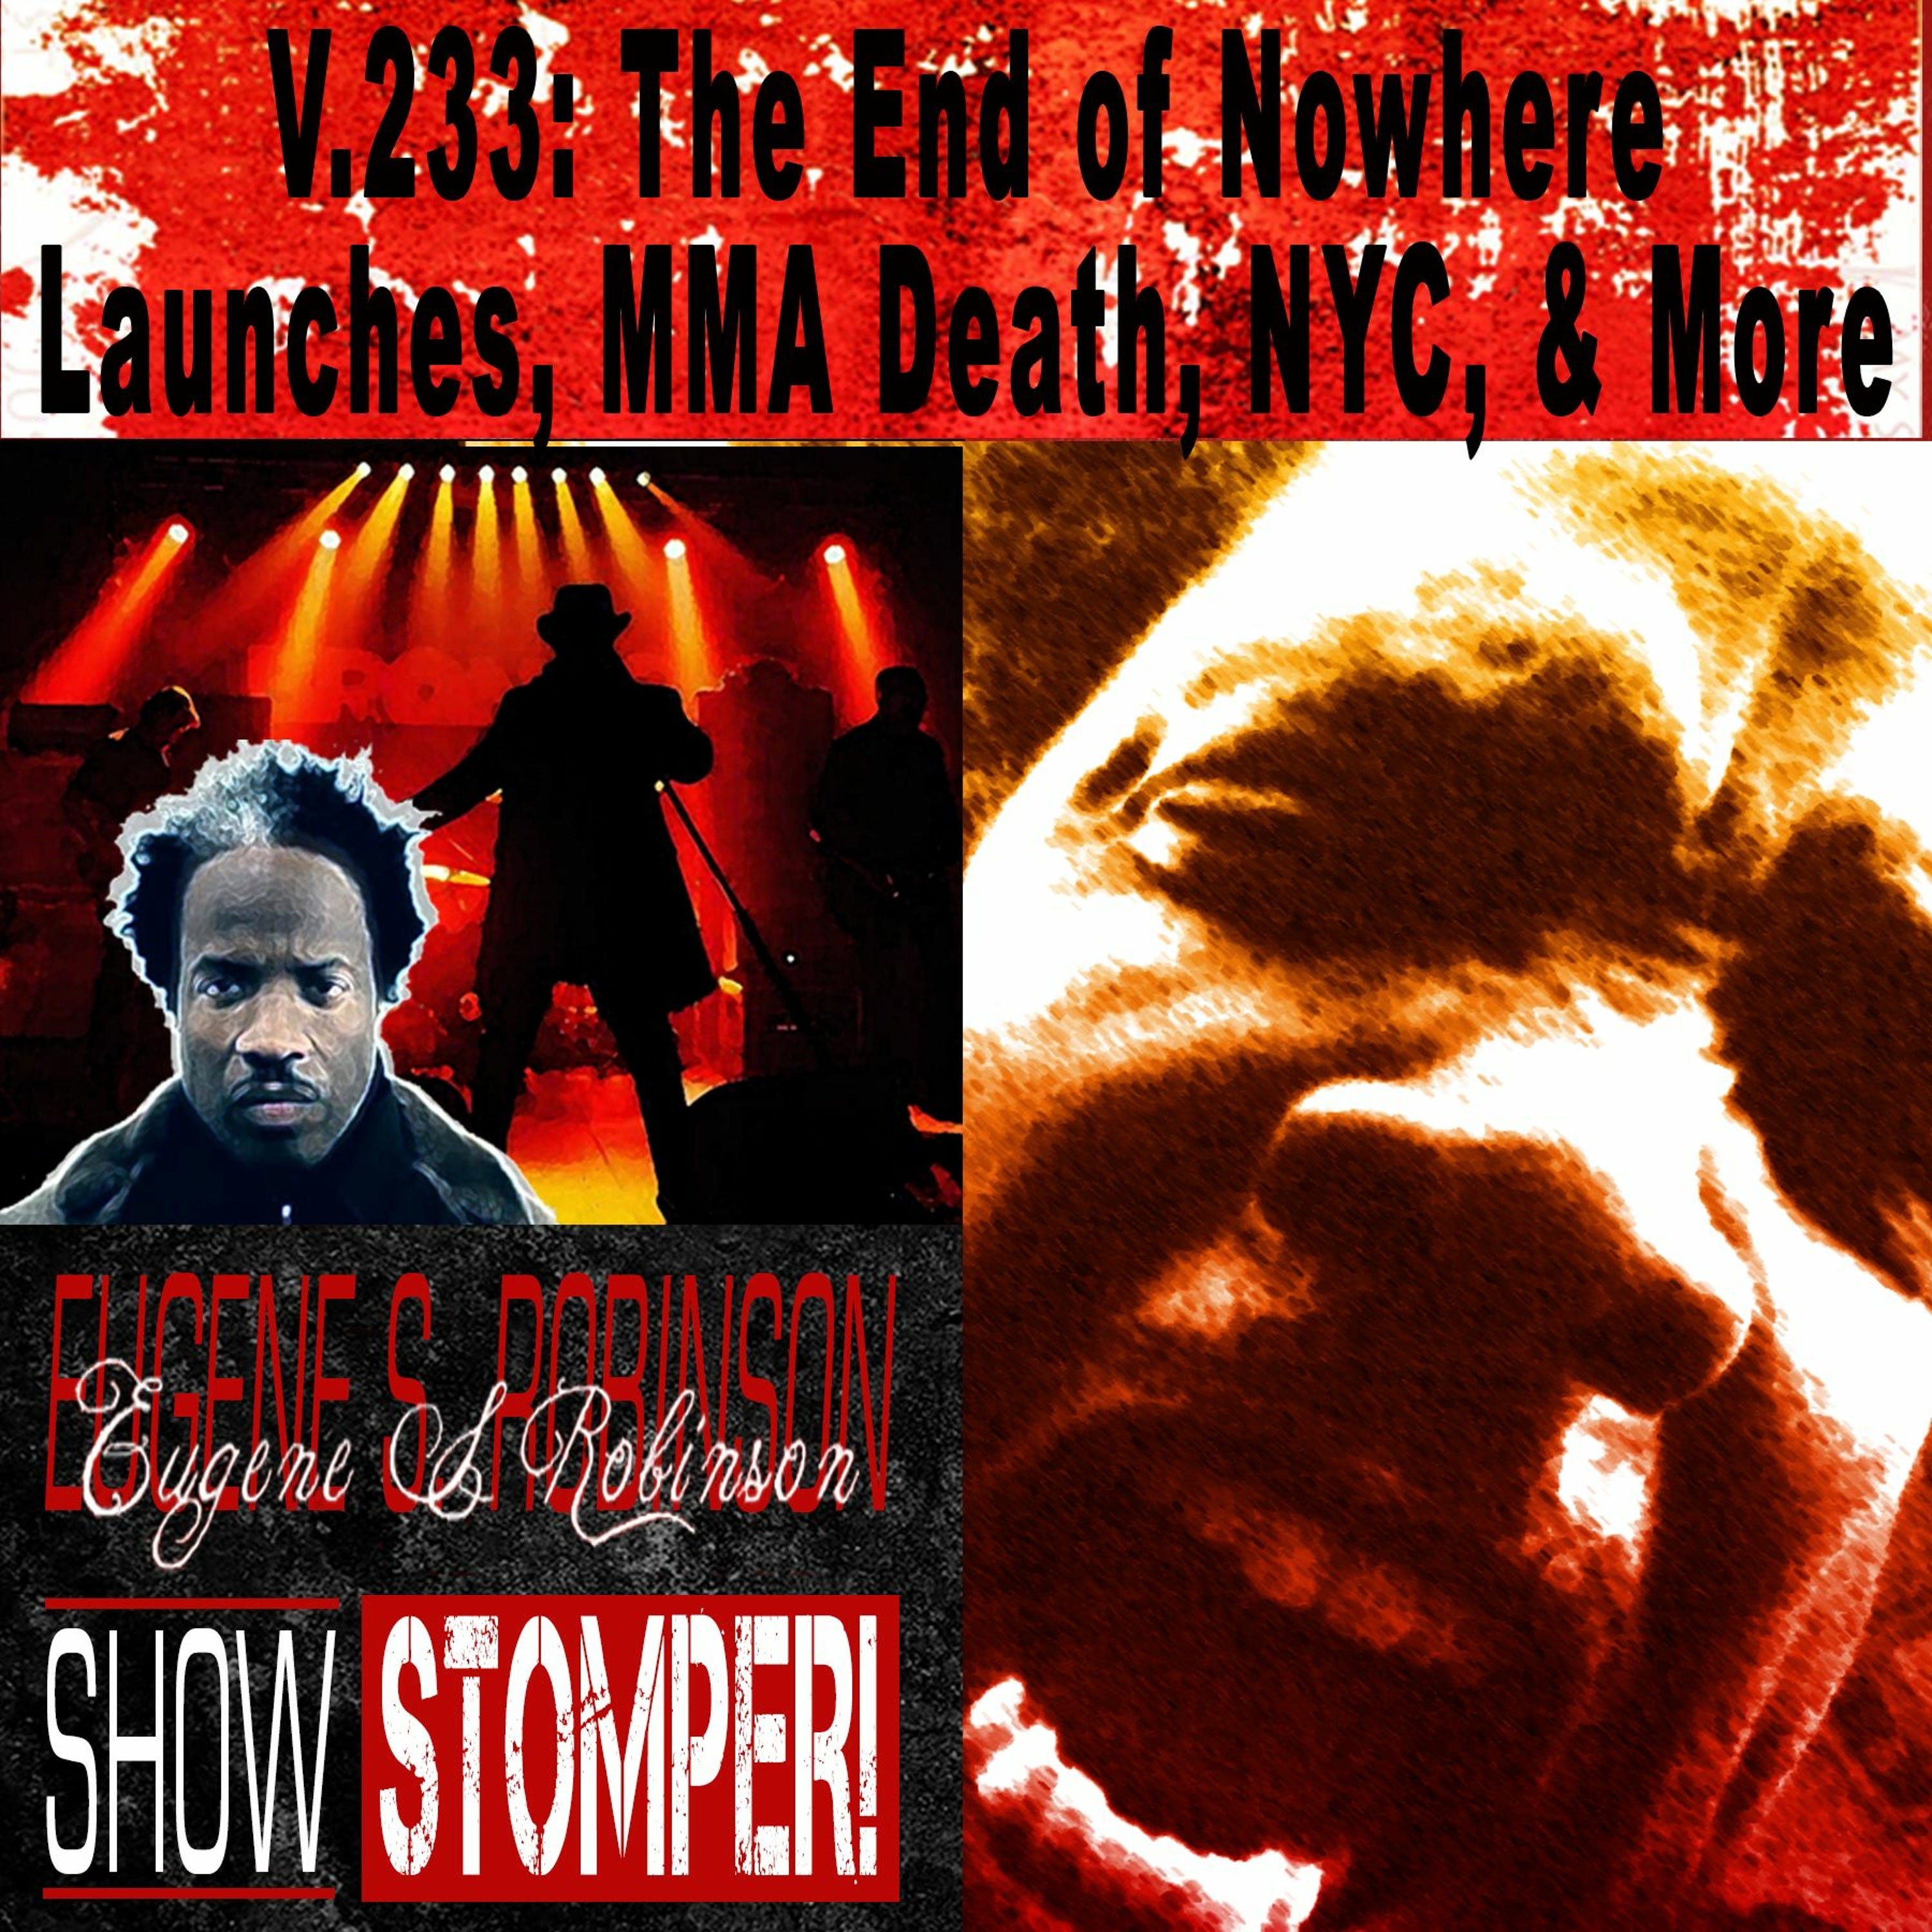 V.233: The End of Nowhere Launches, MMA Death, NYC + More On The Eugene S. Robinson Show Stomper!